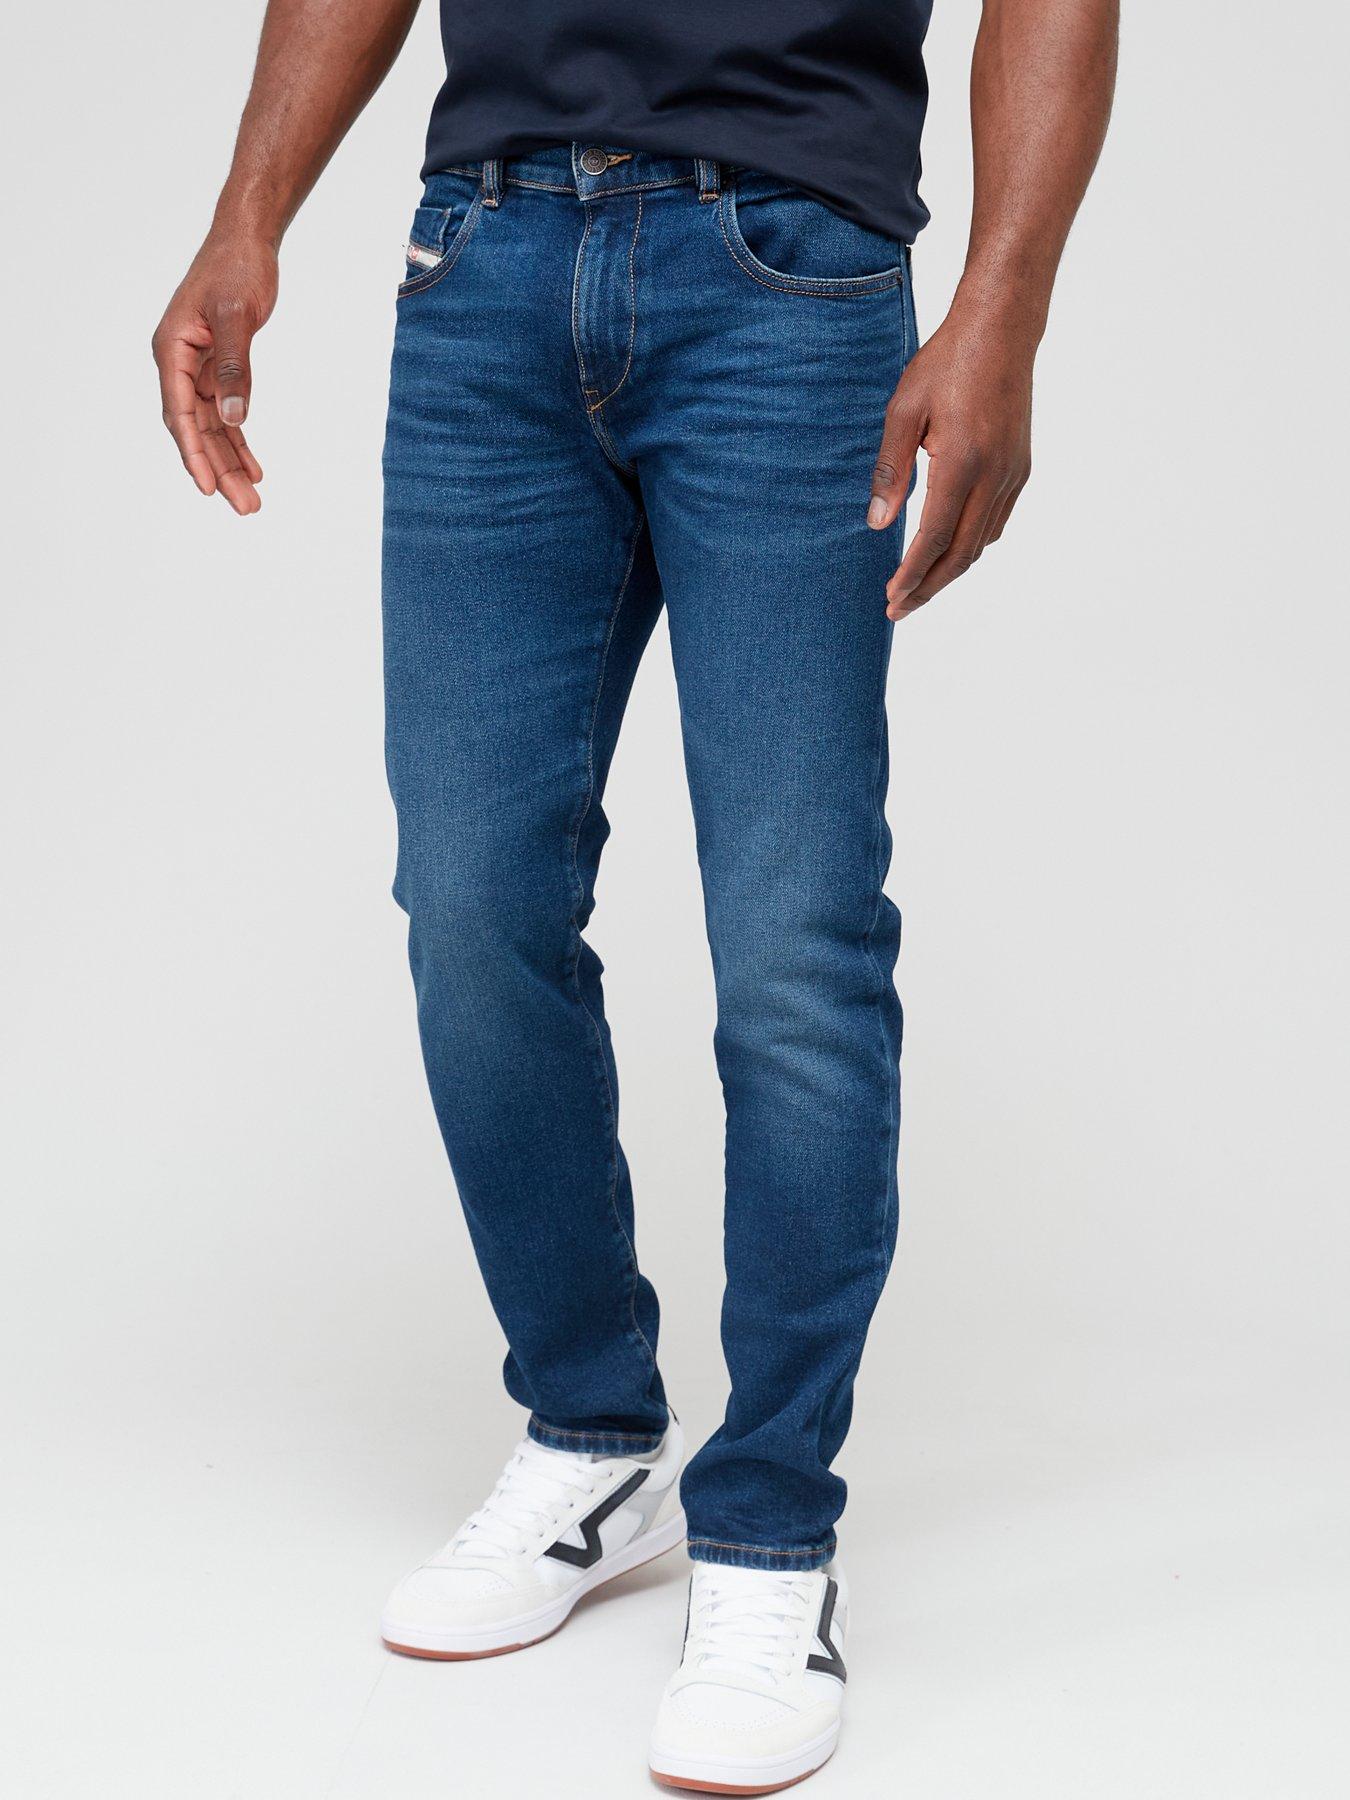 Lima Continuo Barón Diesel Mens Jeans | Shop Diesel Mens Jeans at Very.co.uk